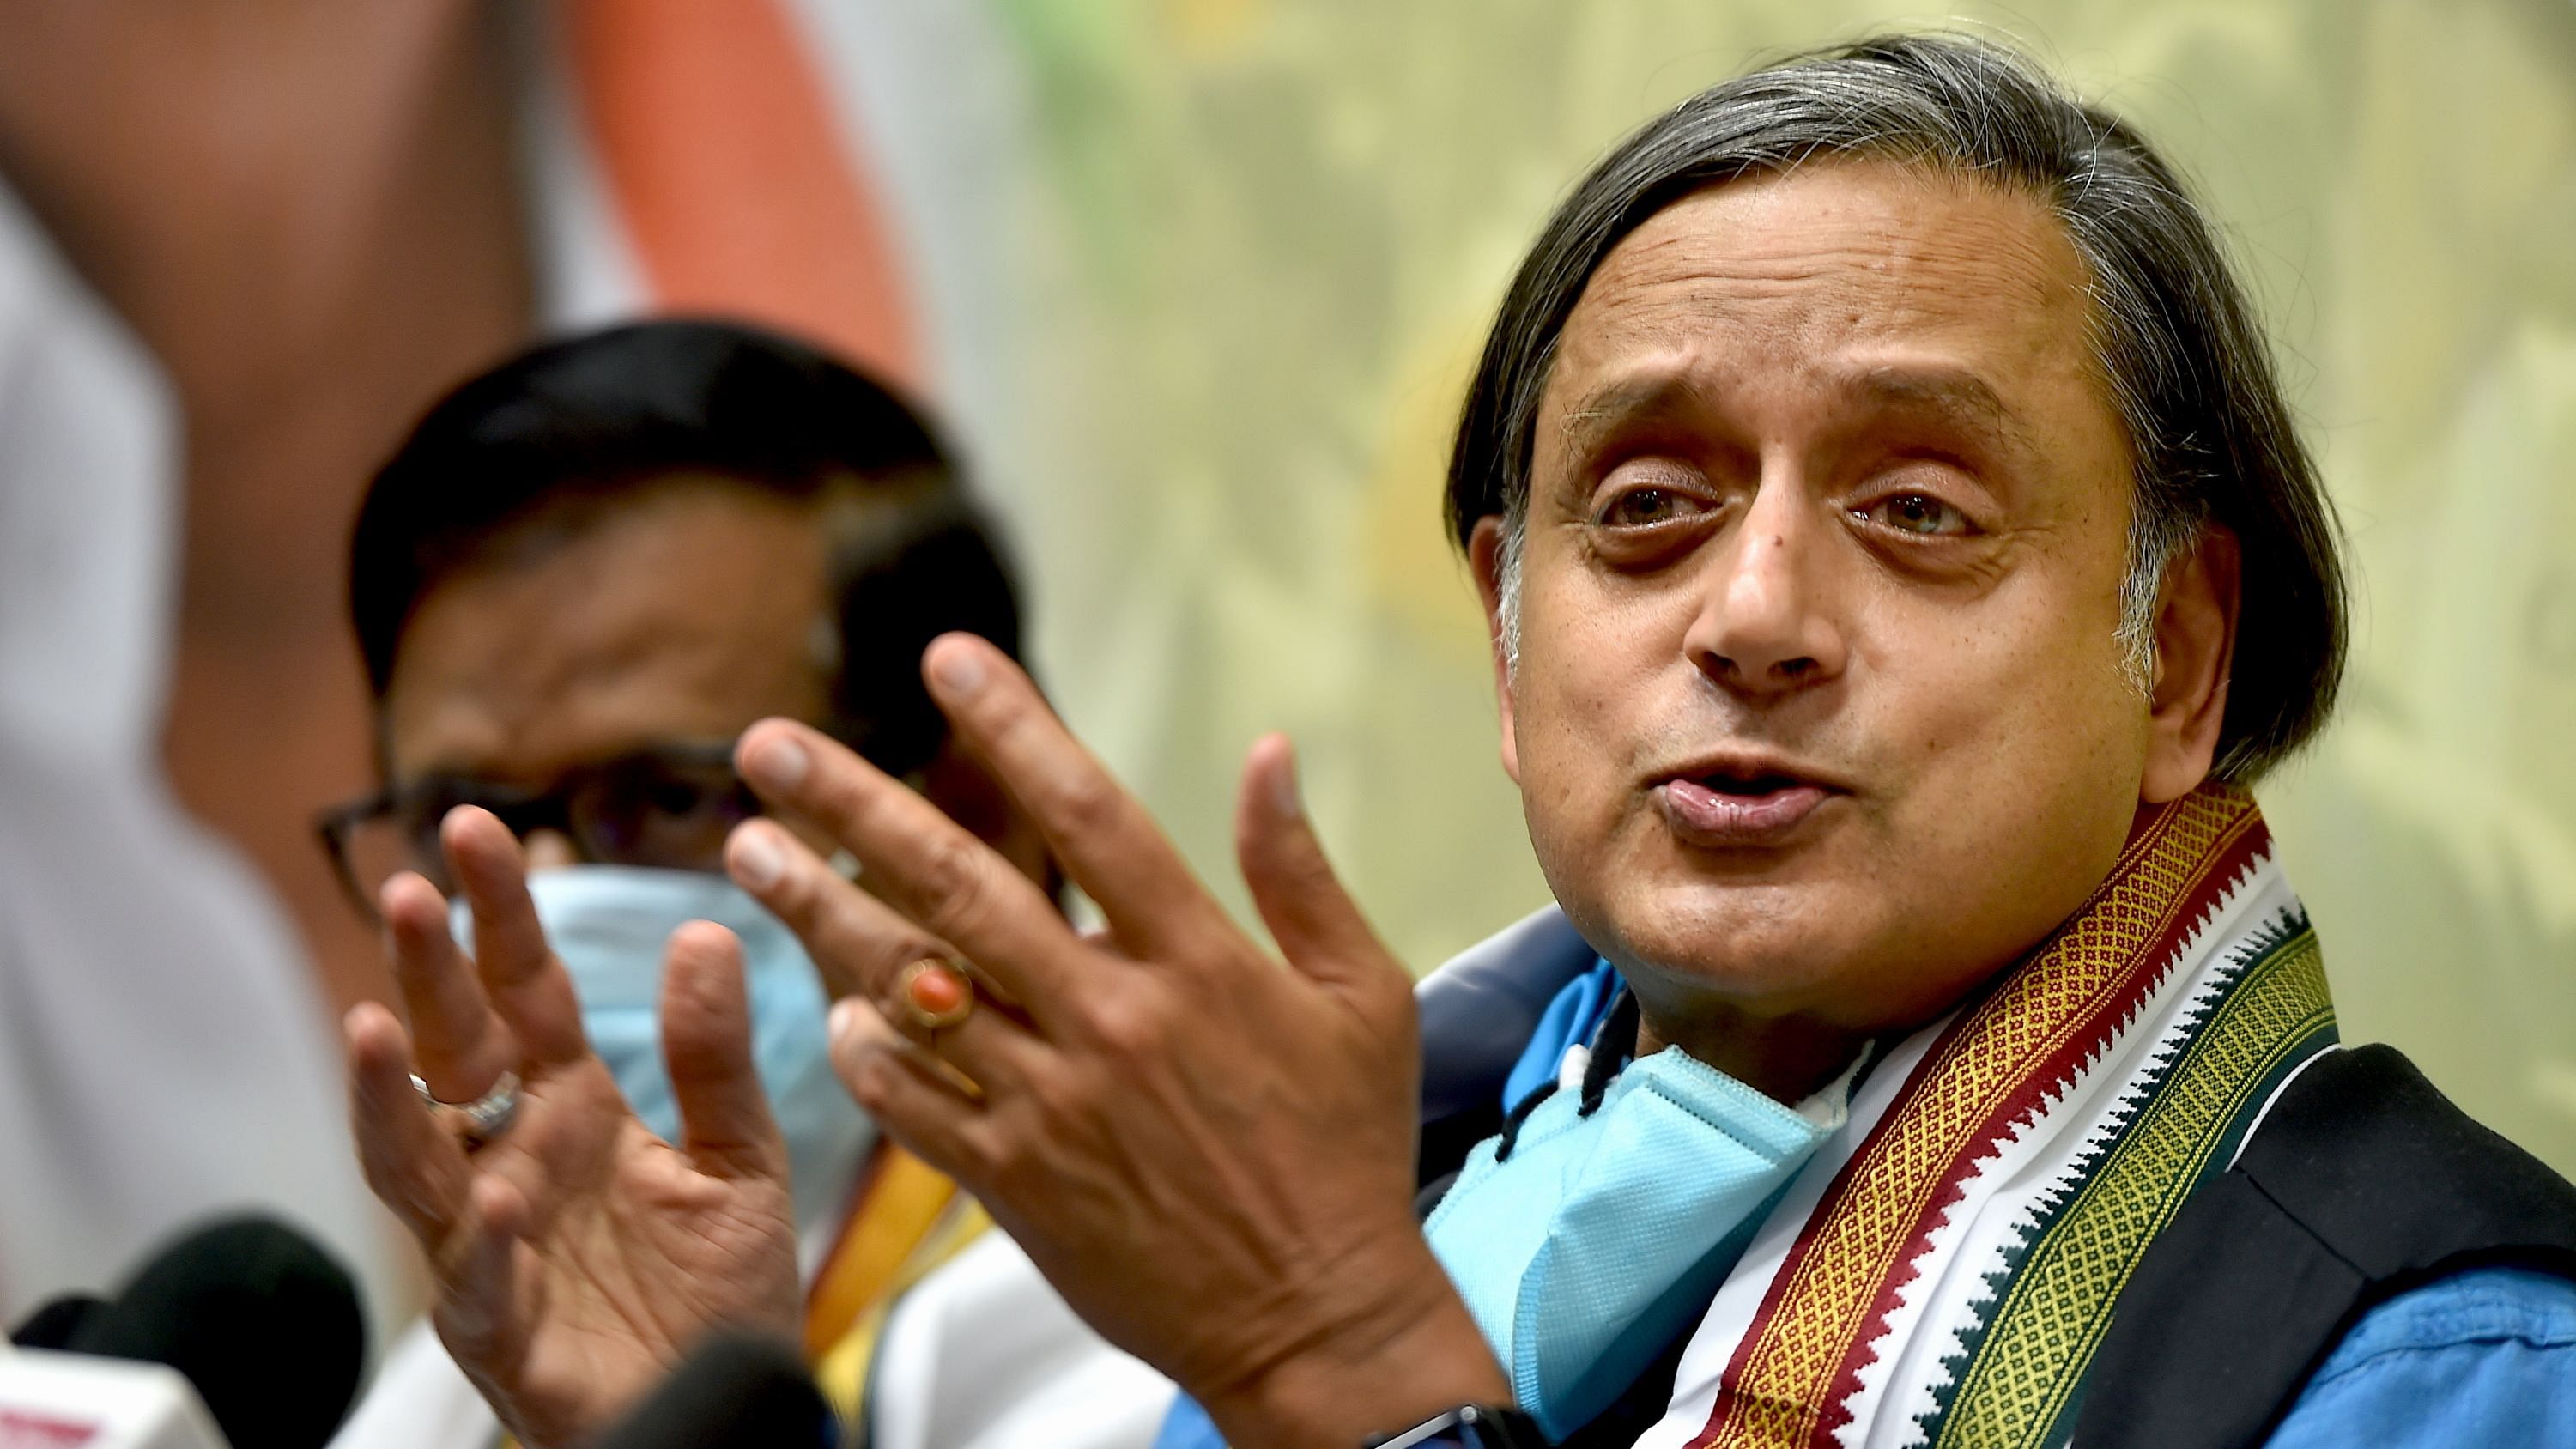 Tharoor was charged under sections 498A (husband or relative of husband of a woman subjecting her to cruelty) and 306 of the Indian Penal Code by the Delhi Police, but was not arrested in the case. Credit: PTI File Photo